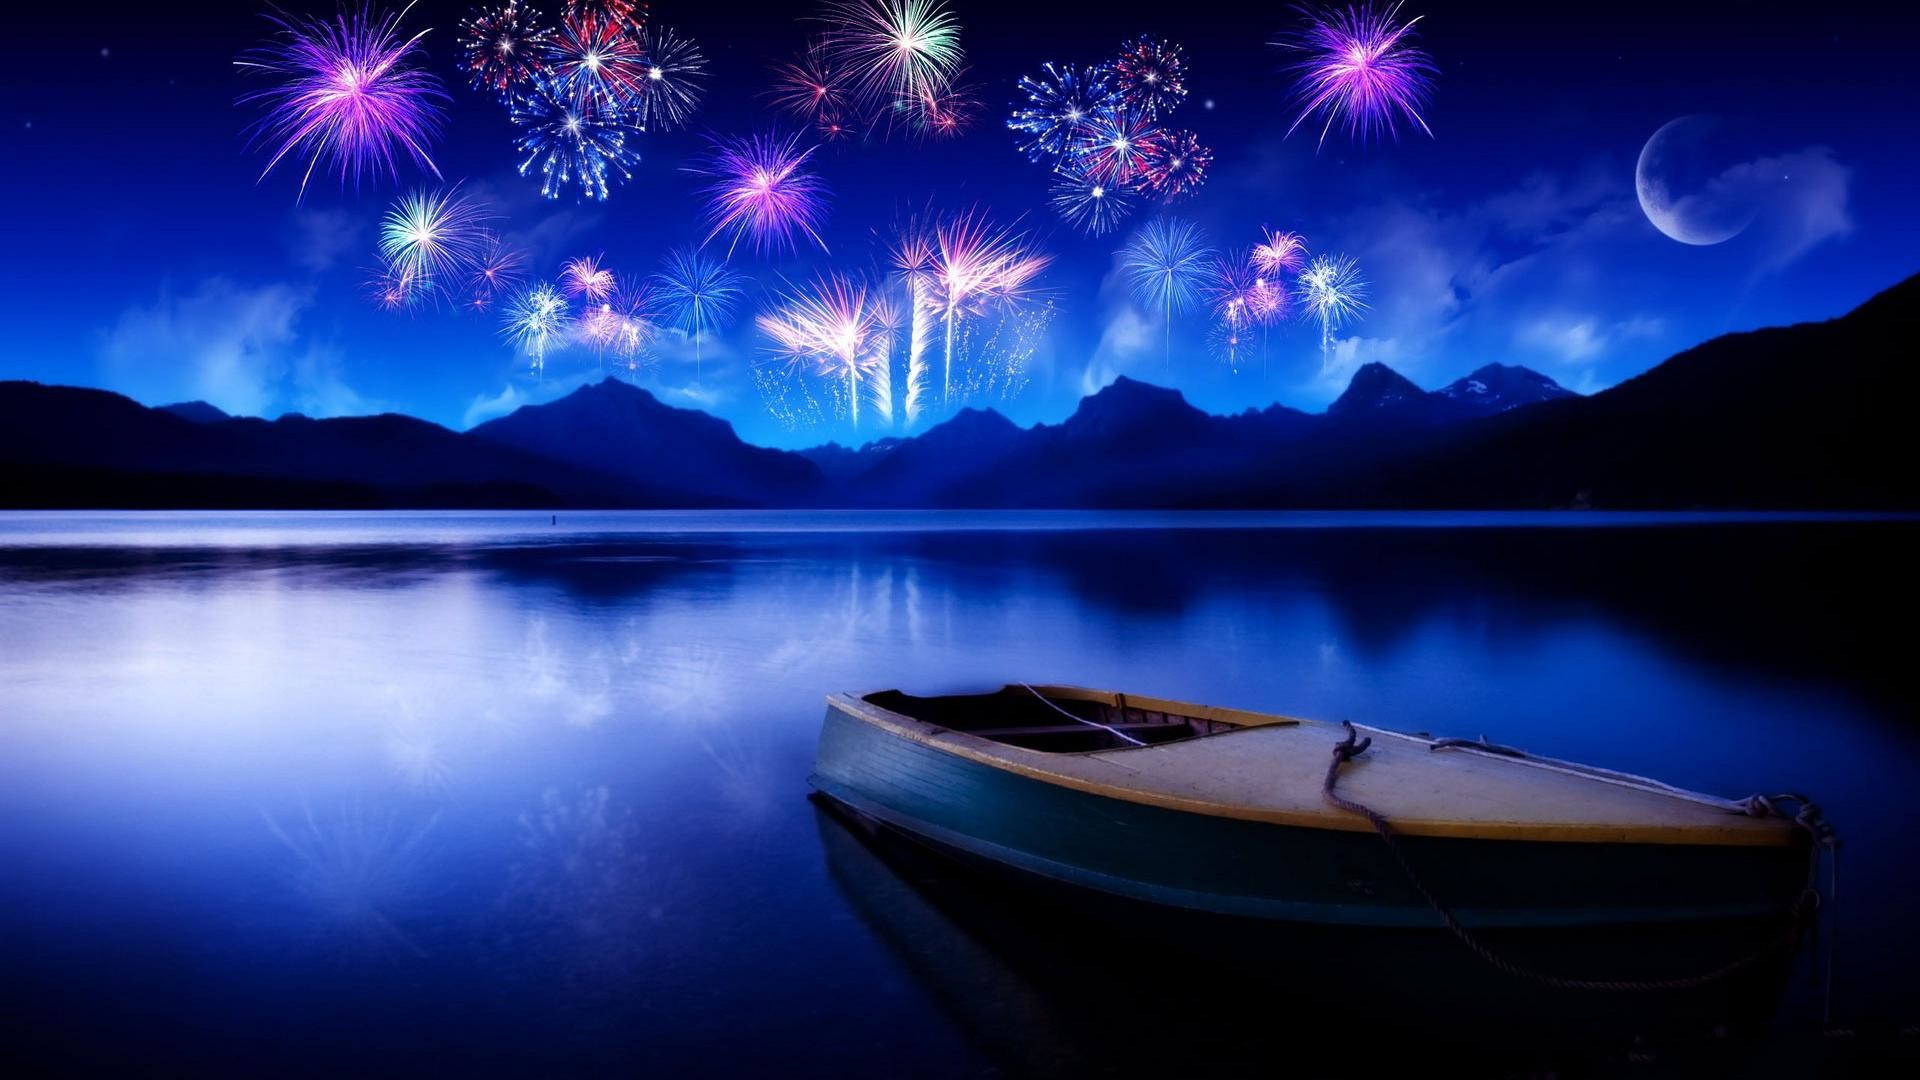 1920x1080  Cool Bright twilight fireworks lake desktop backgrounds wide  wallpapers:1280x800,1440x900,1680x1050